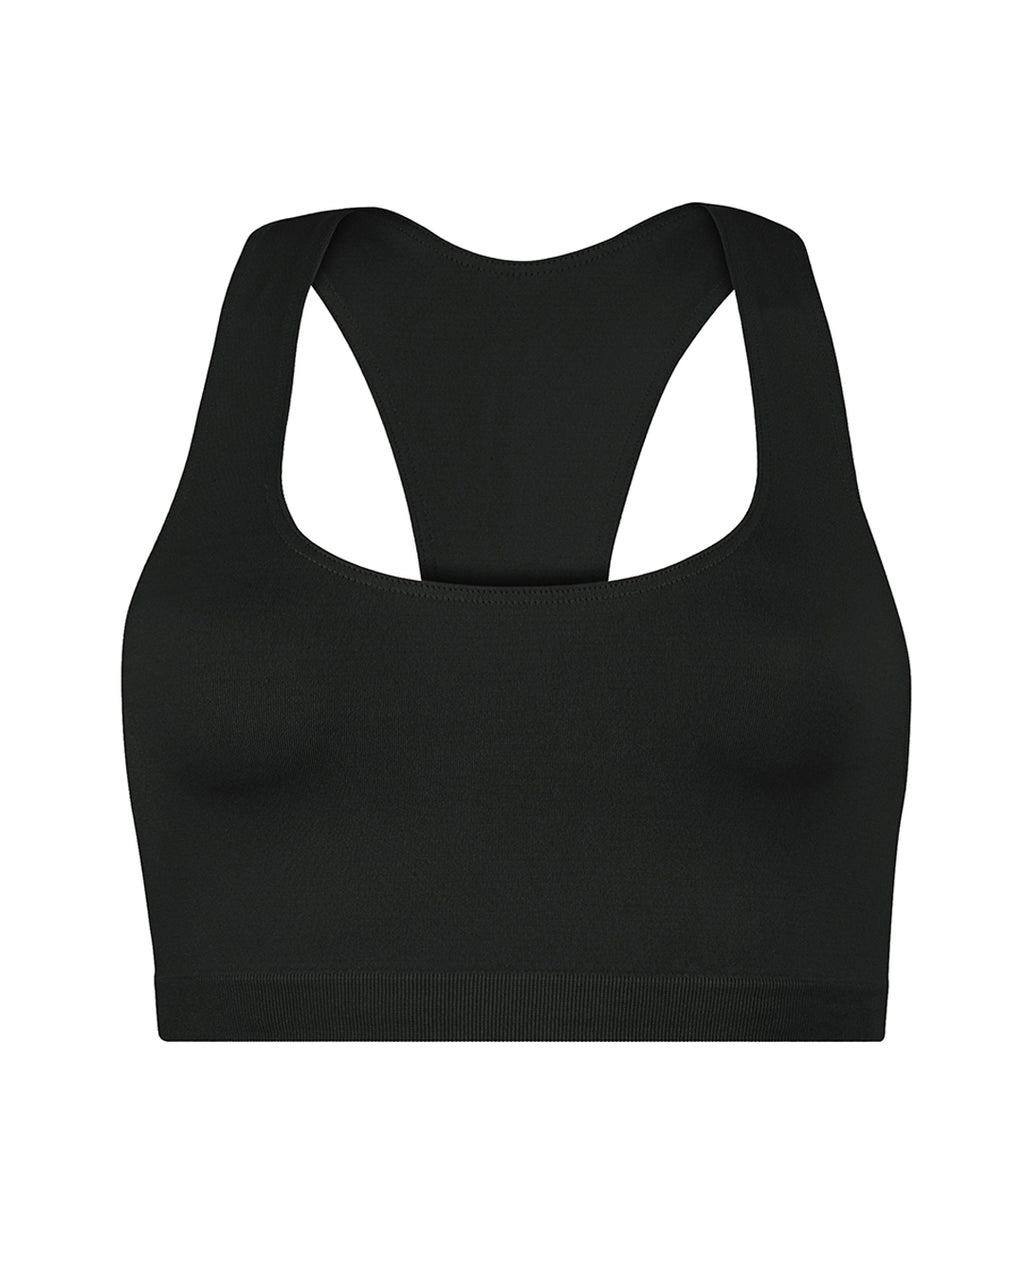 ELATED Black Sporty-Bra Top | Supportive T-Back Design | Stretch PRISM² ...